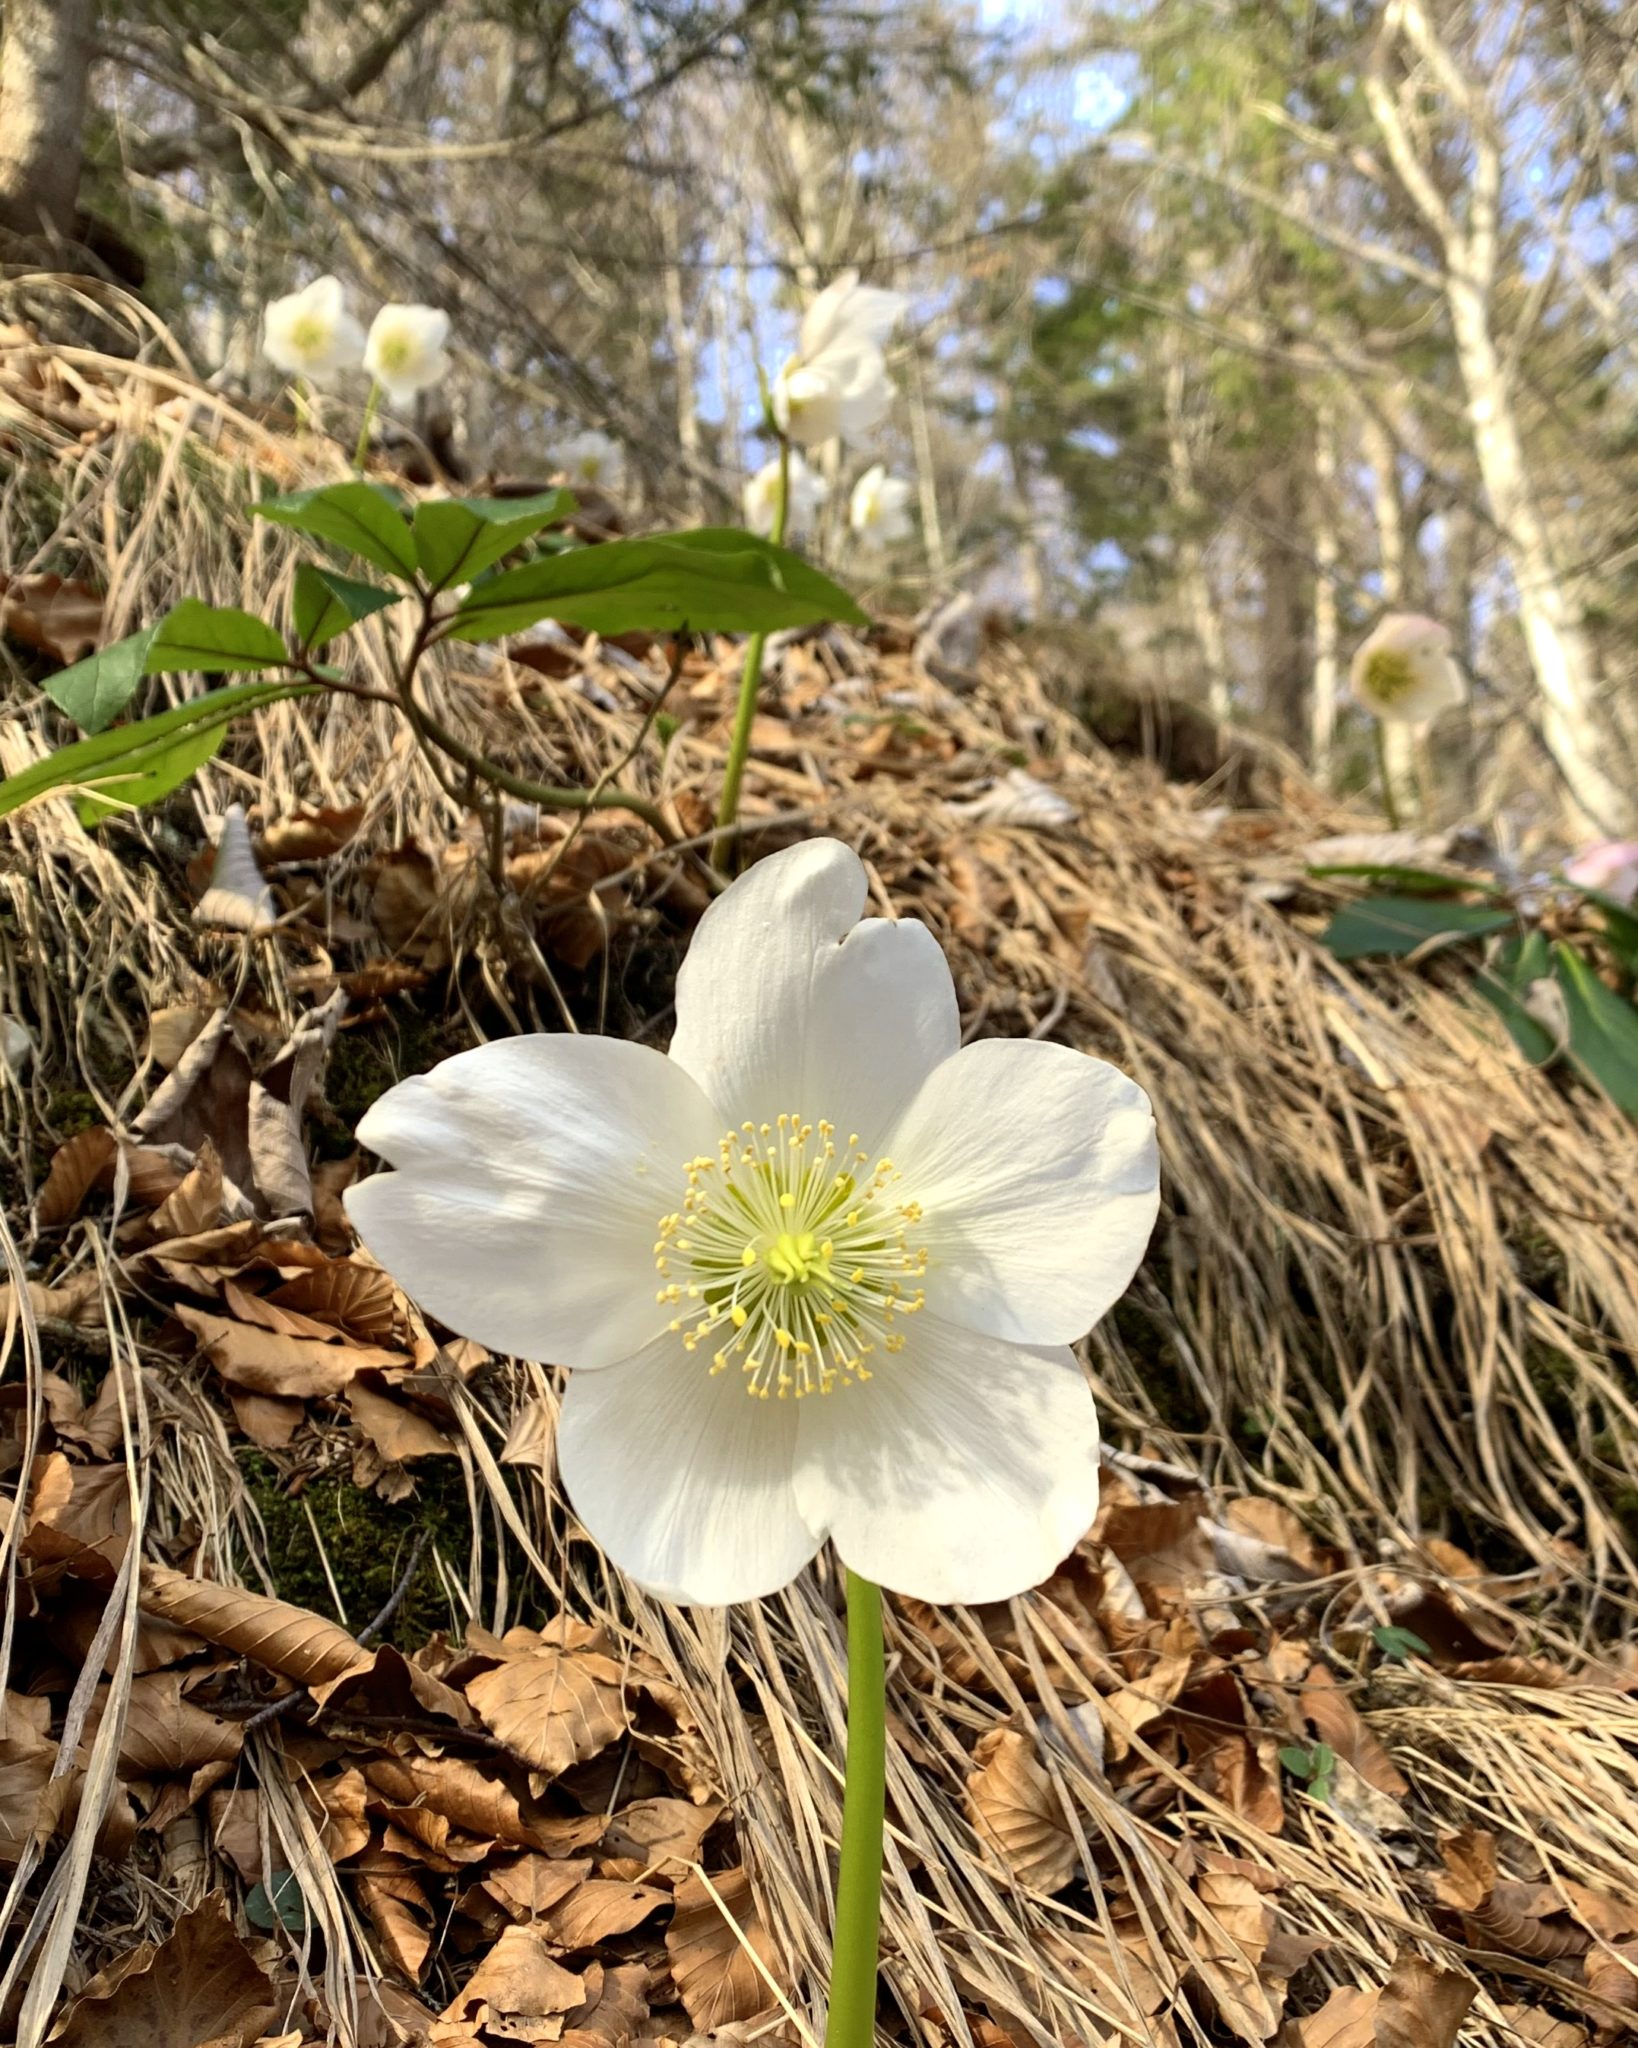 Hellebores blooming in late winter and early spring, Julian Alps, Slovenia